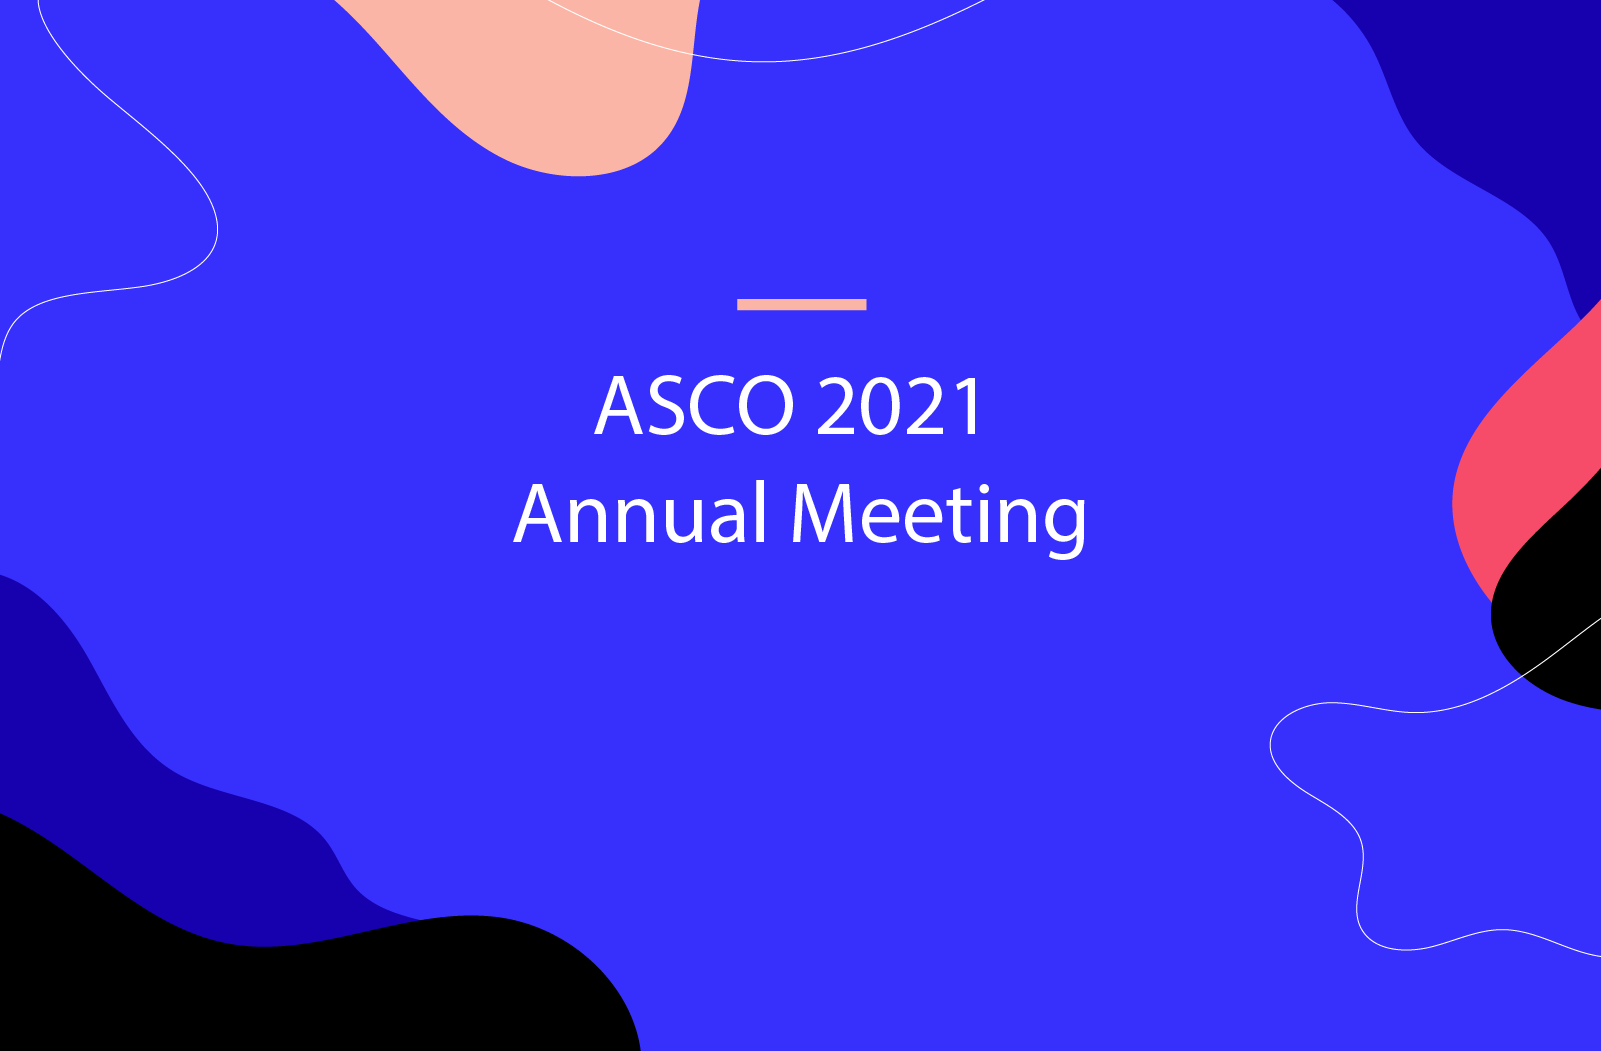 New Data in Early Settings and the Continued Development of Immunotherapies Captured Attention during ASCO's 2021 Annual Meeting.